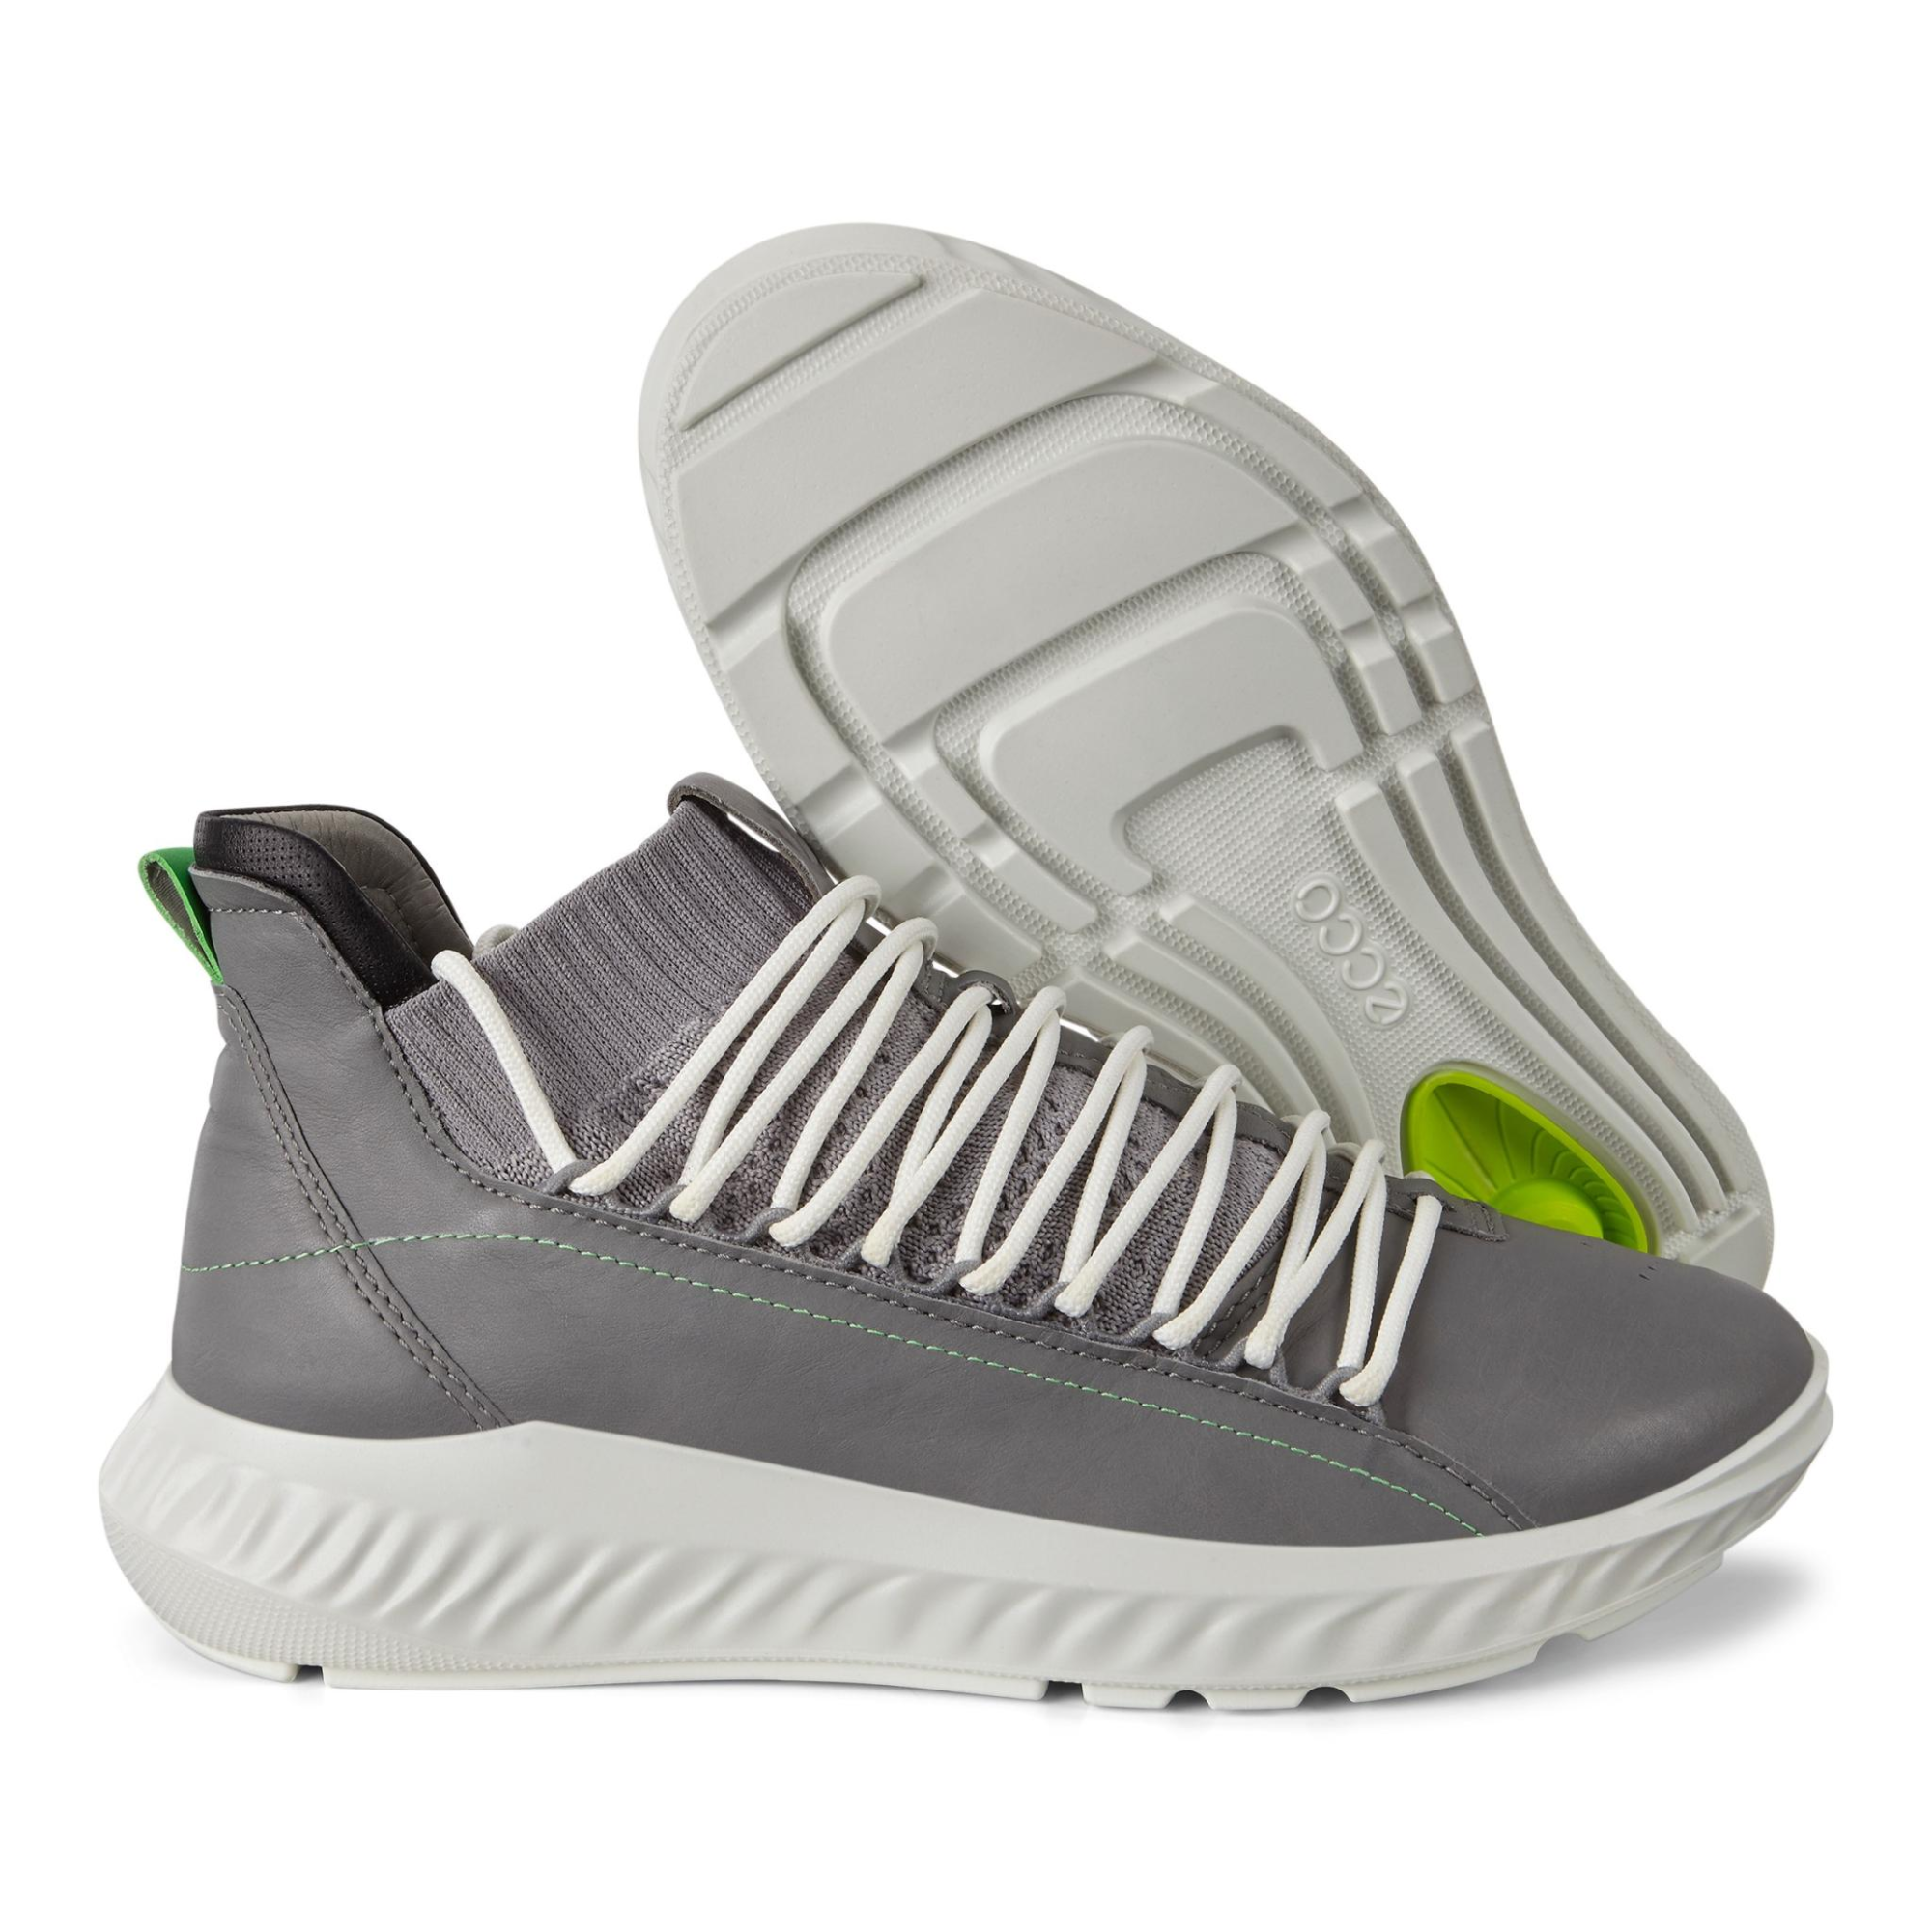 Ecco ST.1 LITE Sneaker 39 - Products - Veryk Mall - Veryk Mall, many product, quick response, safe your money!